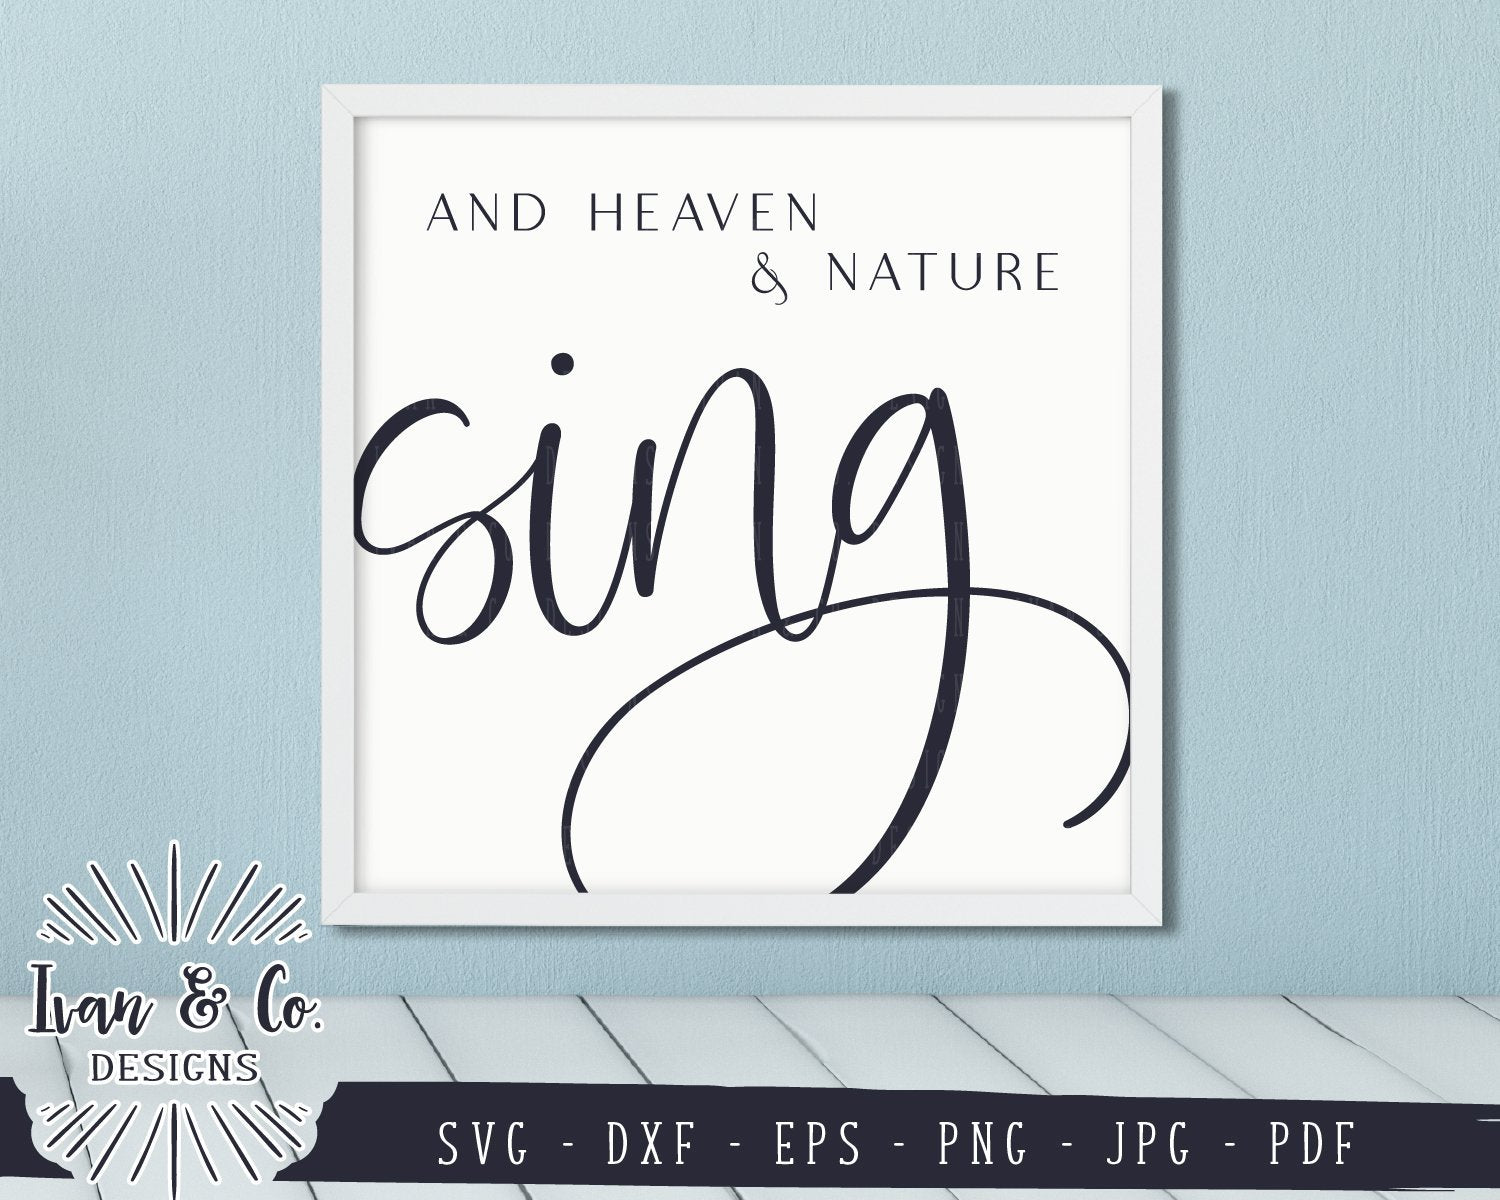 Download And Heaven And Nature Sing Svg Files Christmas Holidays Winter Svg 858193745 So Fontsy